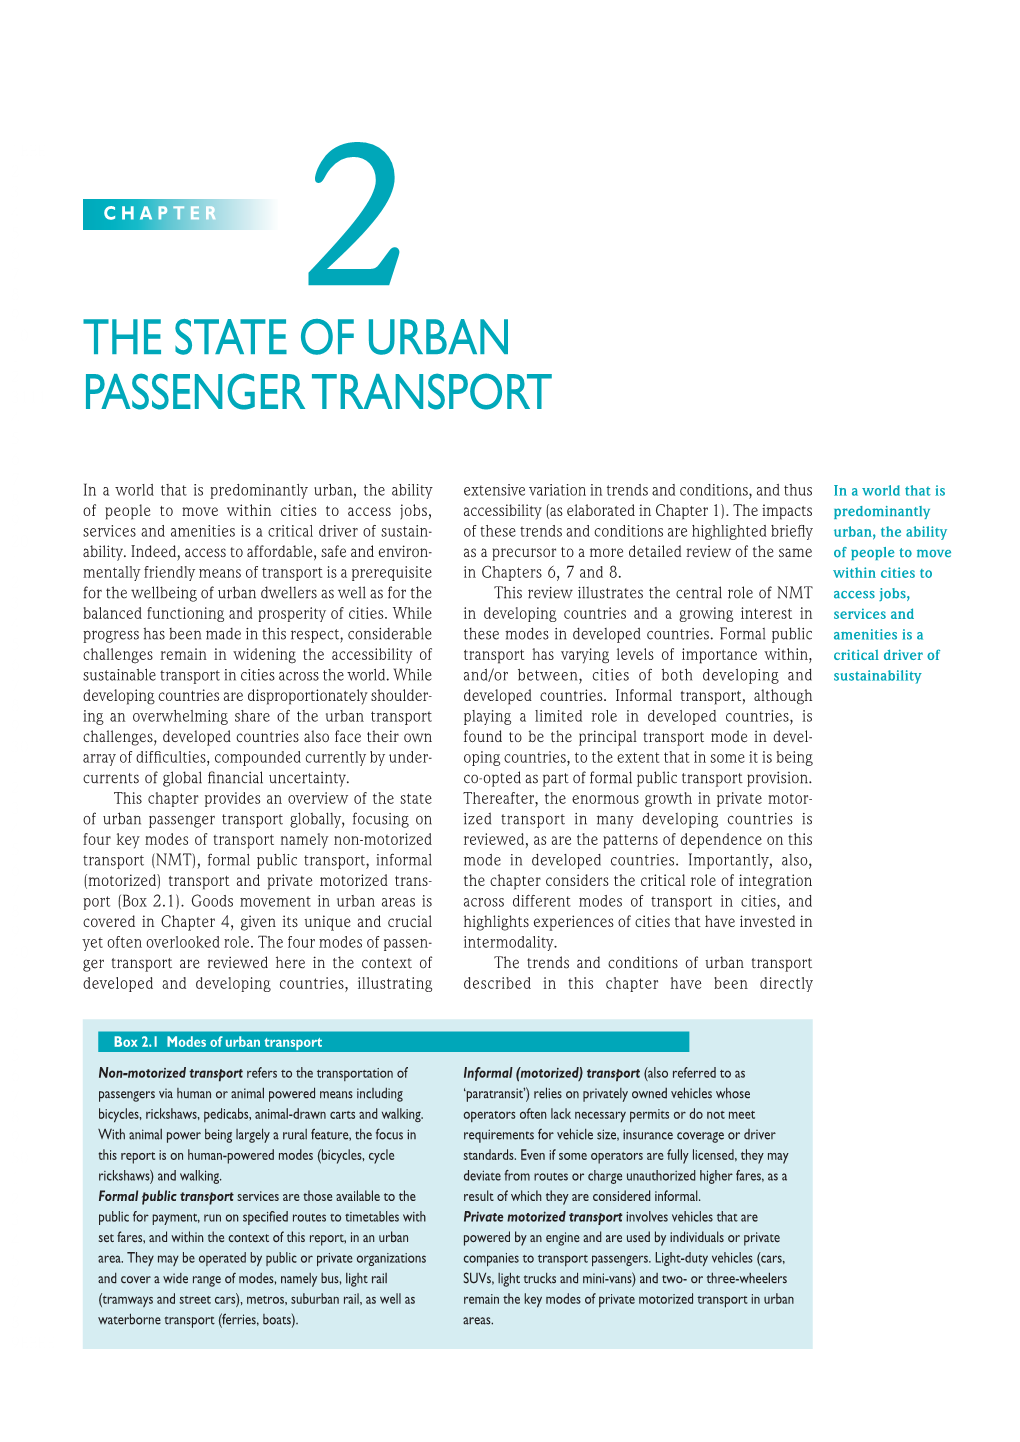 Planning and Design for Sustainable Urban Mobility: Global Report On